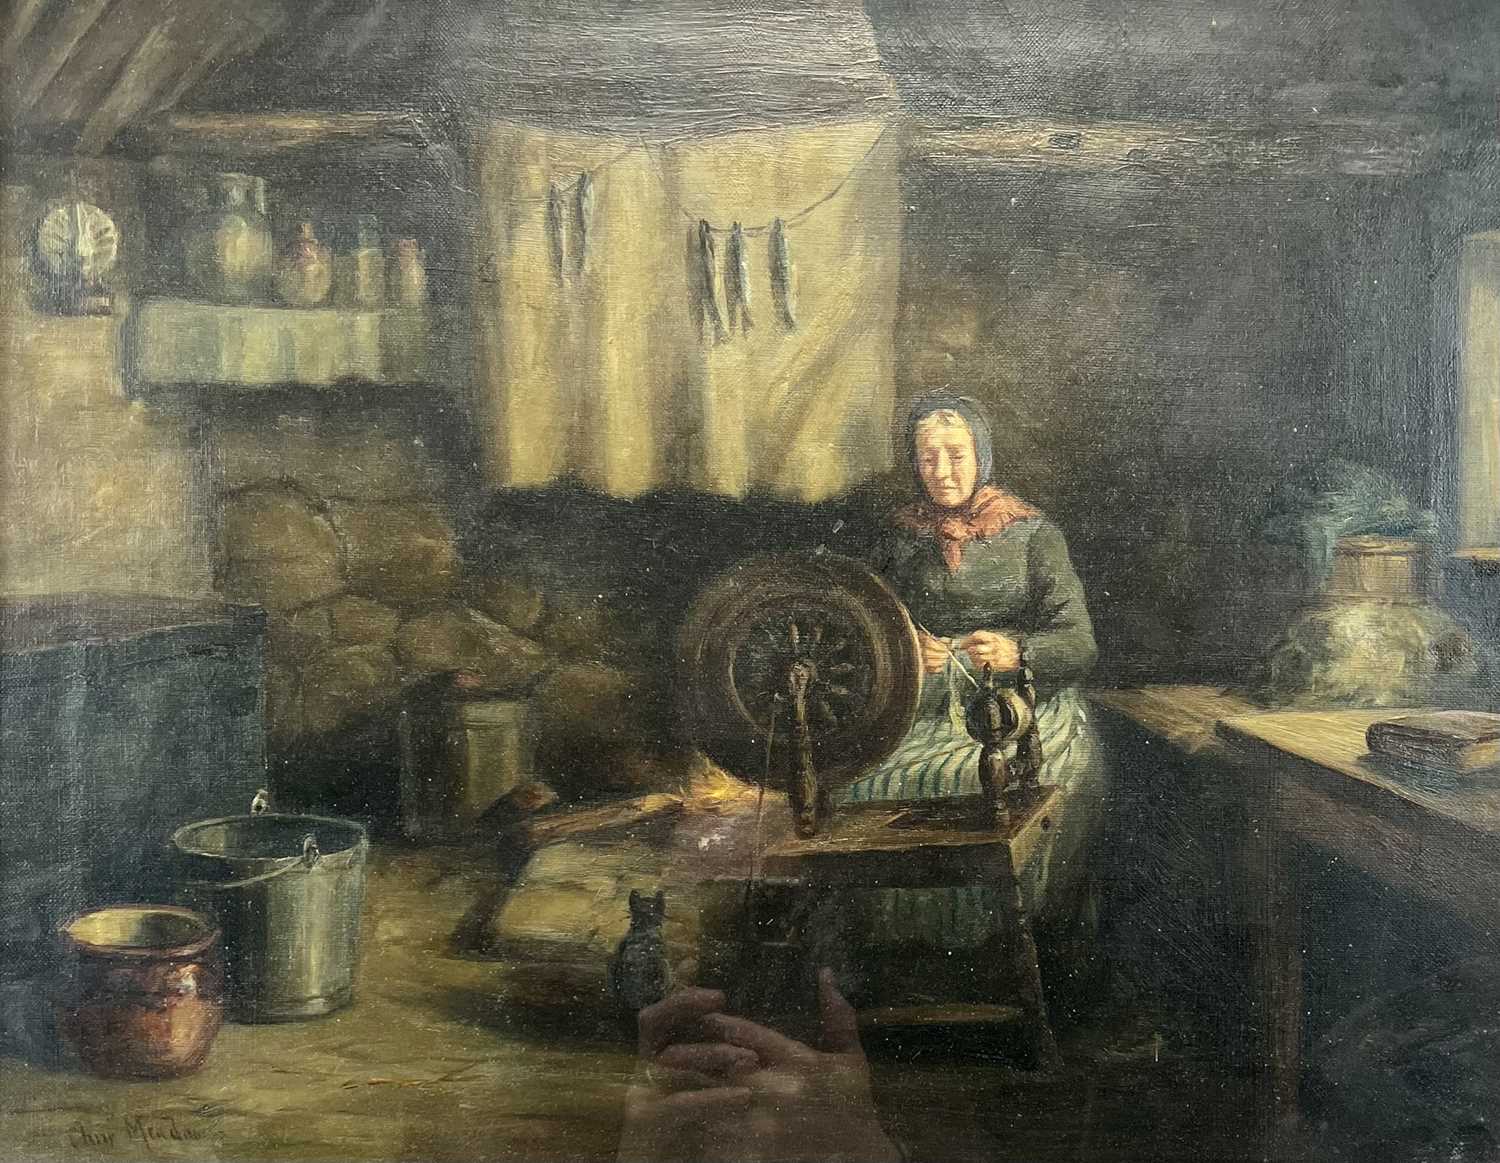 CHRIS MEADOWS (British, 1863-1947) oil on canvas - interior scene with woman seated by spinning